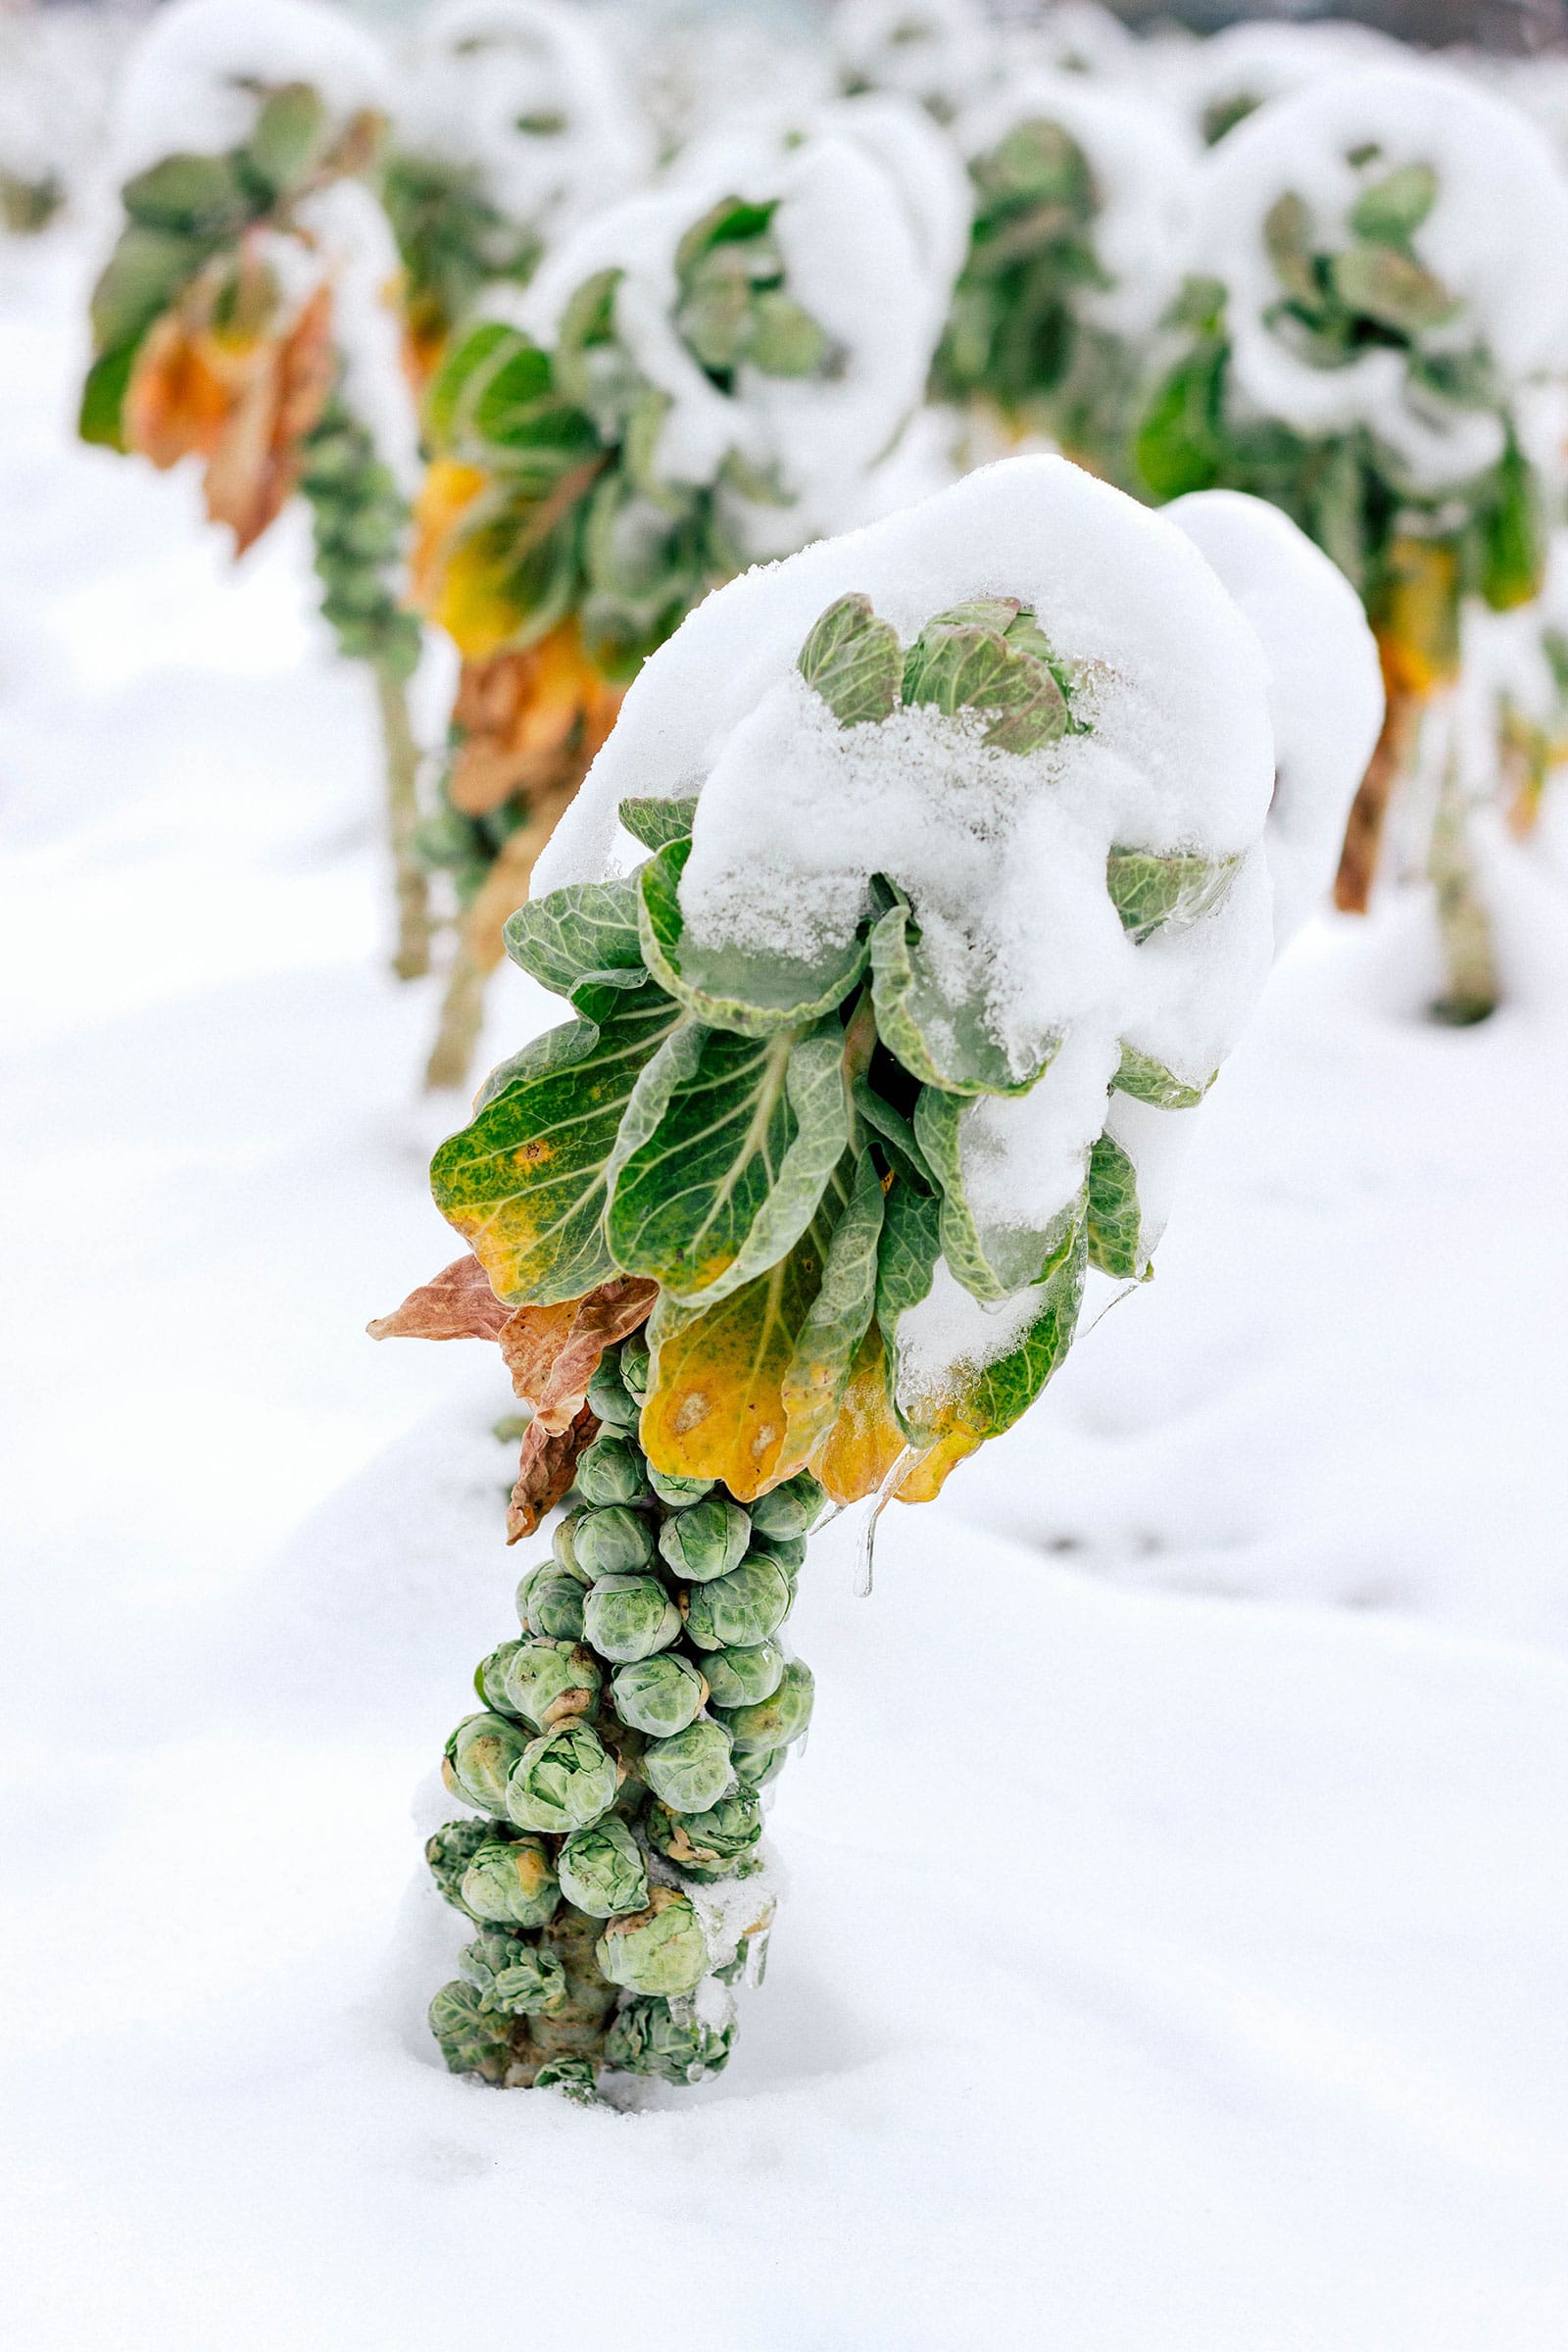 Why do some vegetables turn sweeter in winter?